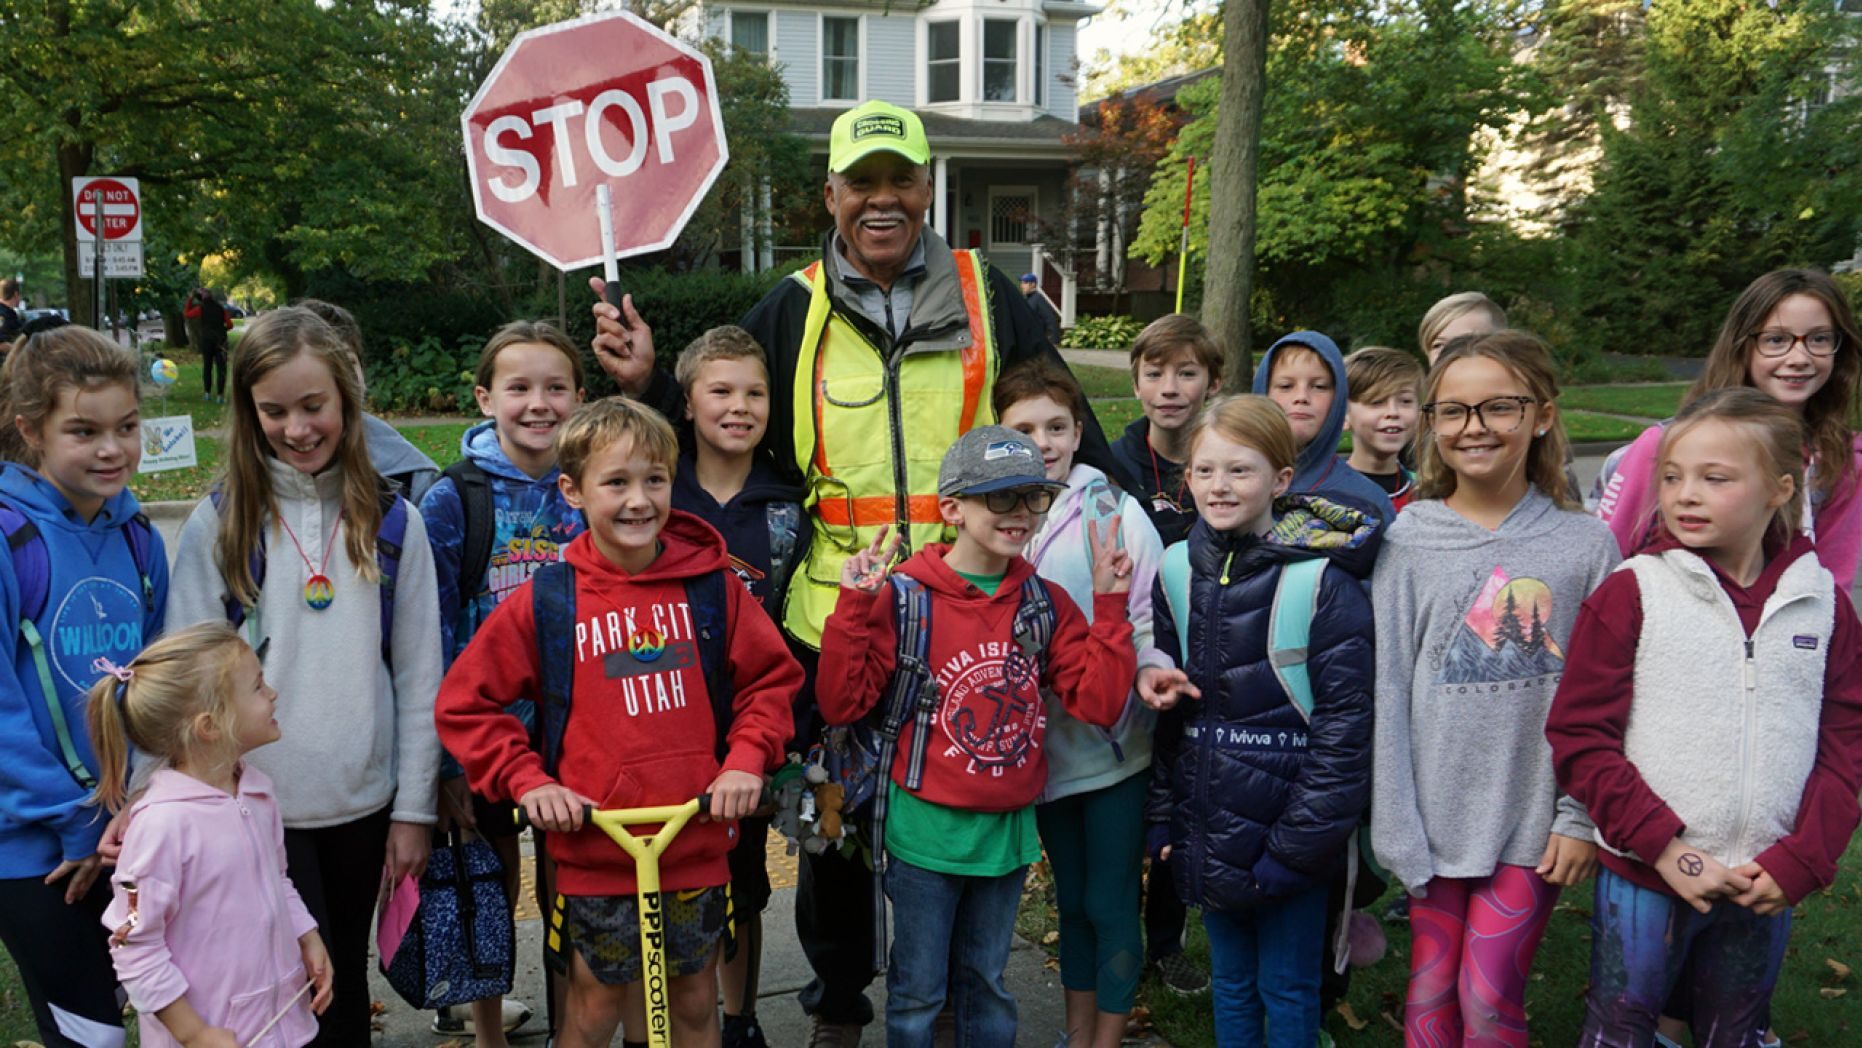 Over 100 Show Up To Celebrate Beloved Crossing Guard's 80th Birthday